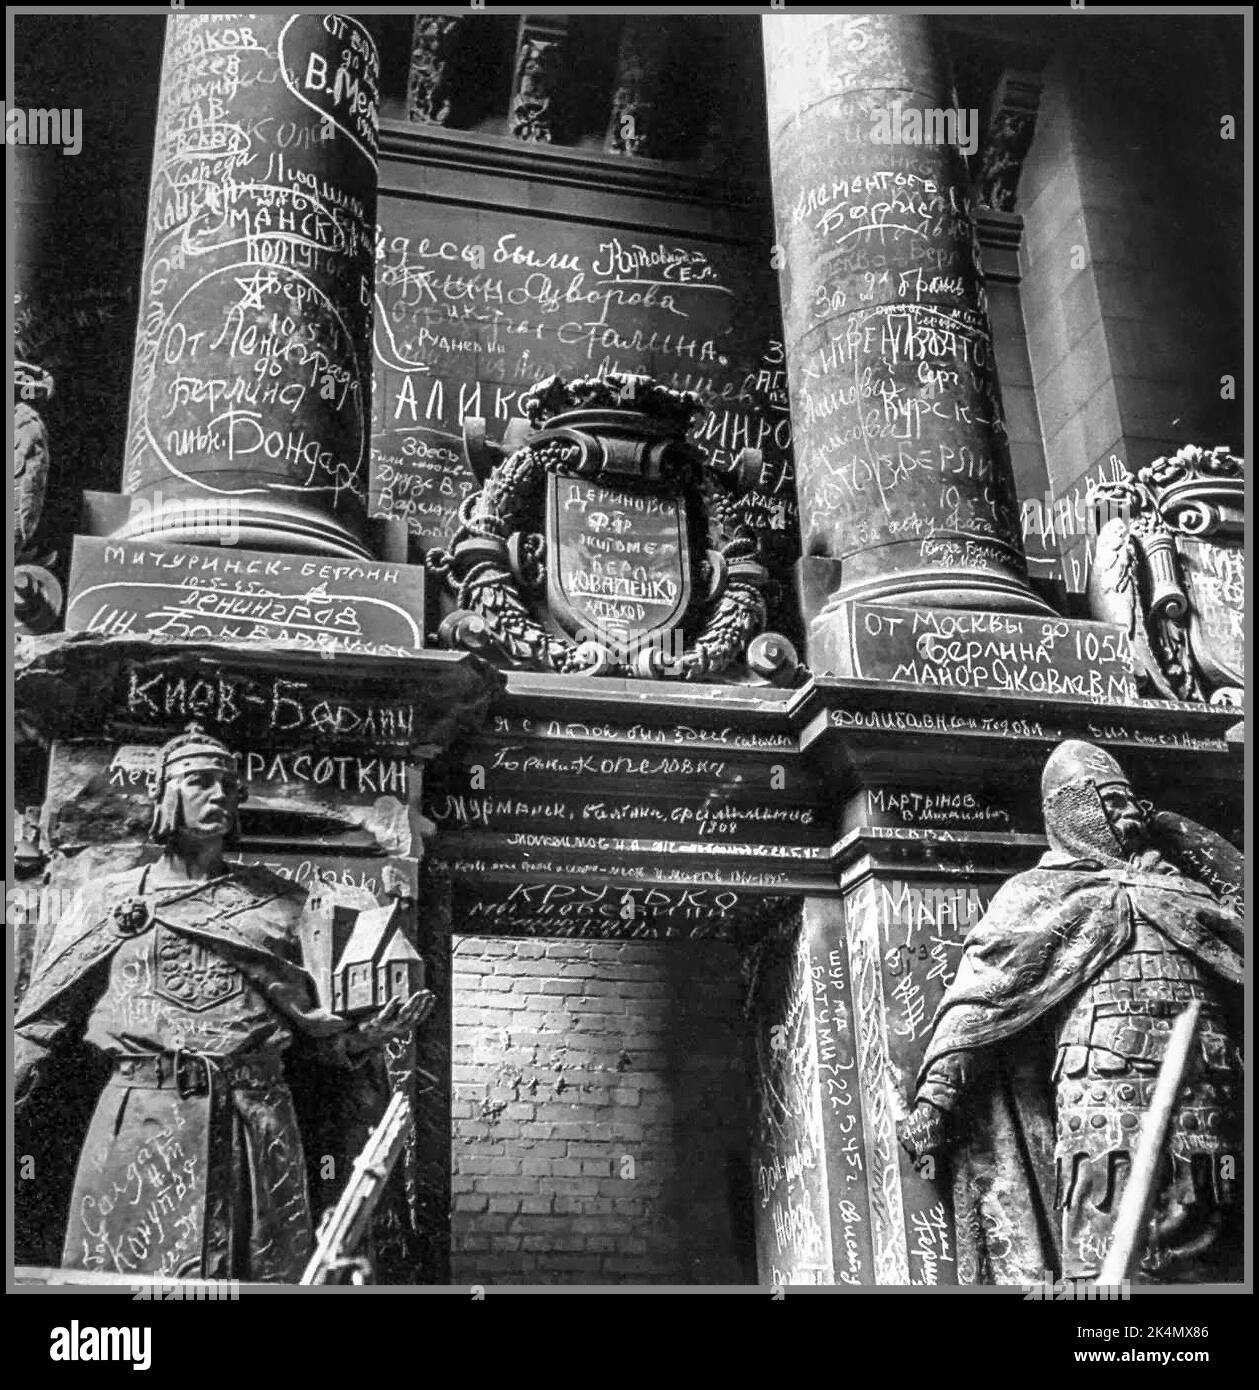 1945 WW2 The Nazi Reichstag Berlin covered in Russian graffiti after the collapse defeat and surrender of Nazi Germany 1945 World War II Red Army soldiers scrawl graffiti across Reichstag in occupied Berlin: 'Hitler kaputt', 'From Stalingrad with love', 'Kilroyski was here'. Stock Photo